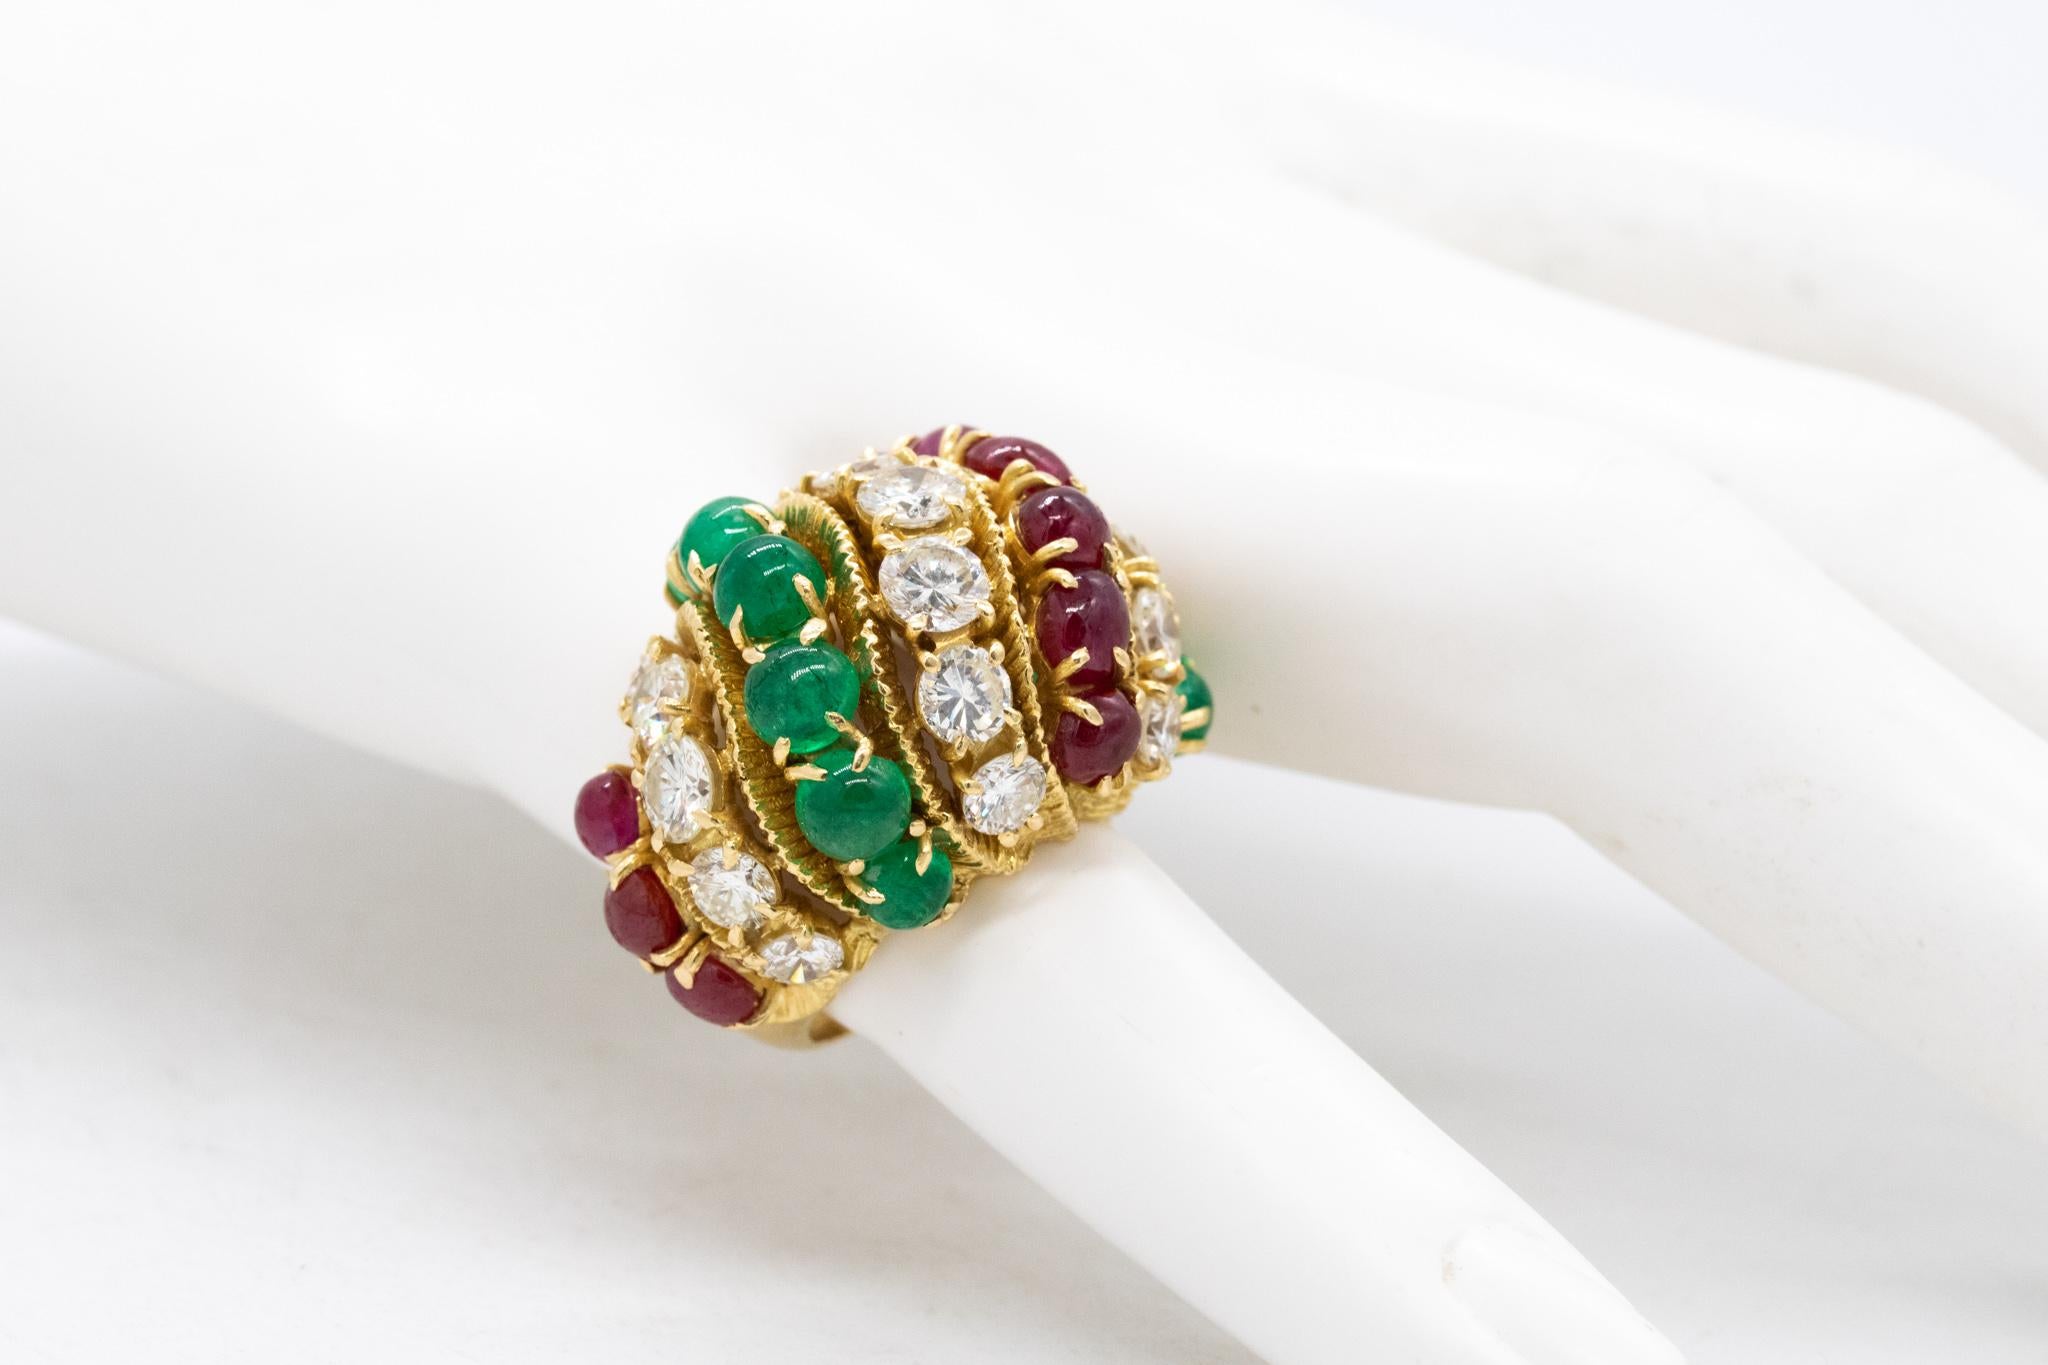 Post-War Mid-Century 1950 Tutti Frutti Bombe Ring 13.35 Ctw Diamonds Rubies and Emeralds For Sale